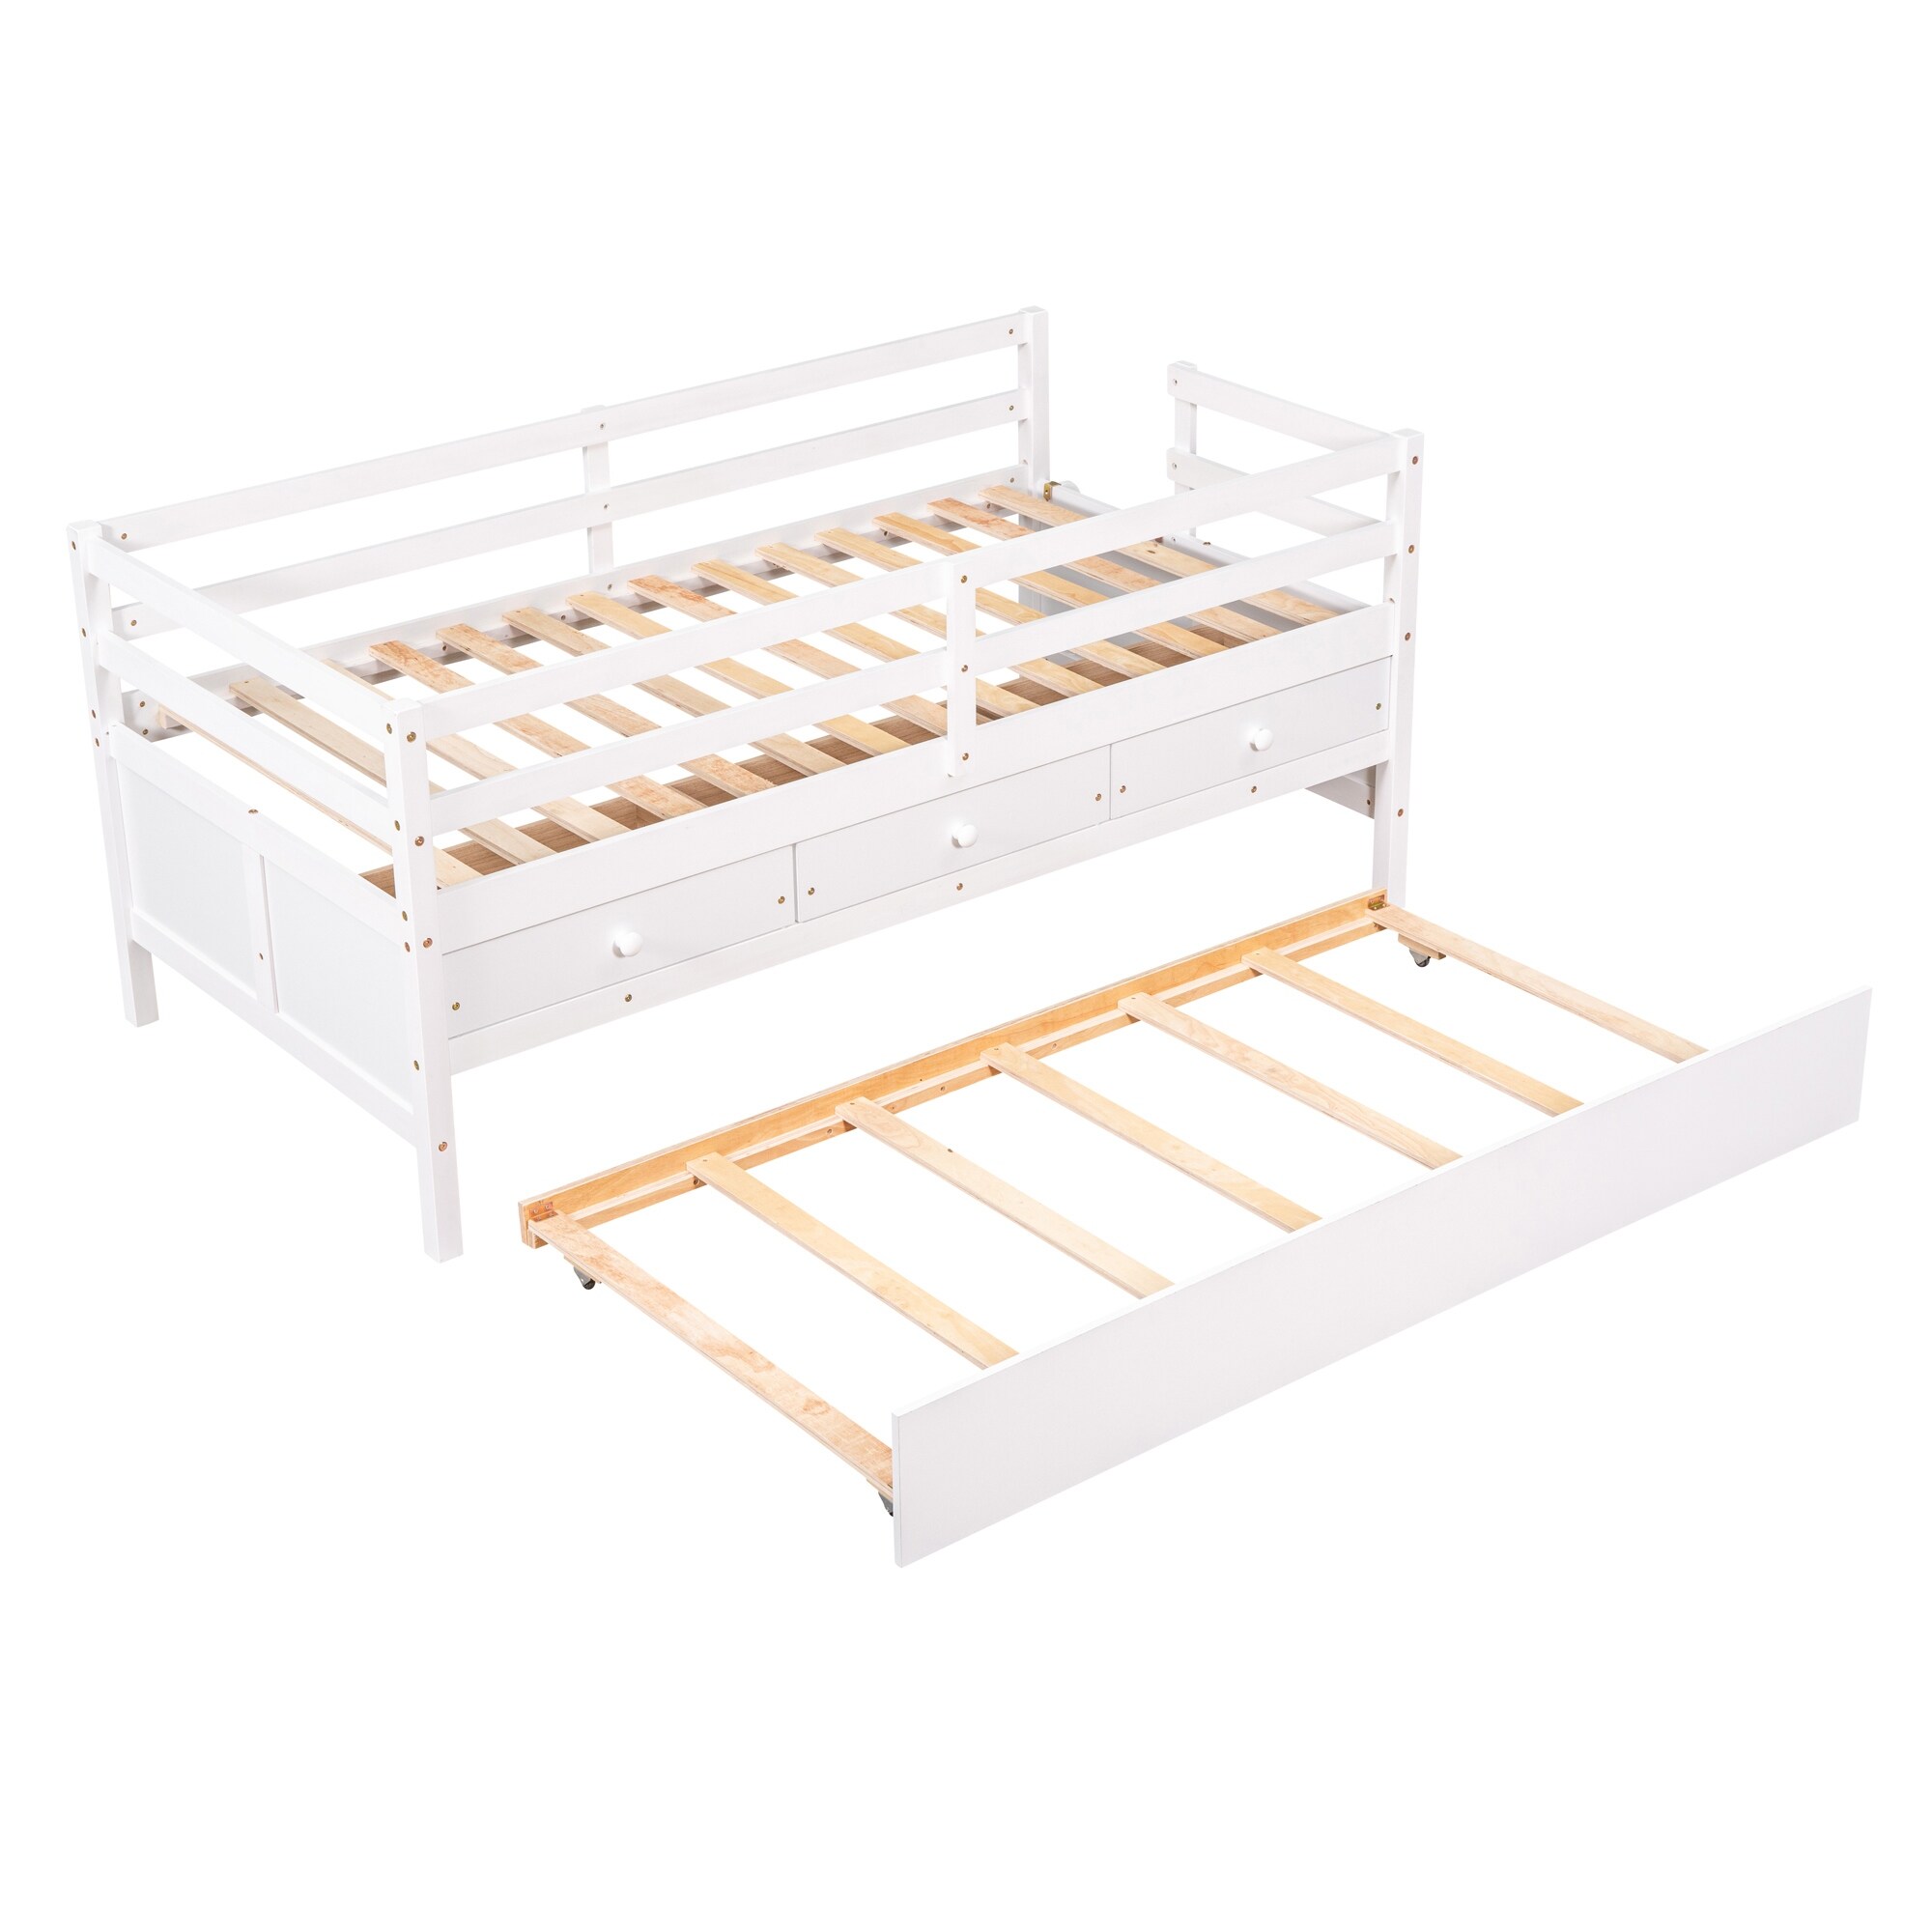 Twin Size Low Loft Bed with Full Safety Fence, Climbing ladder, Storage Drawers and Trundle, White